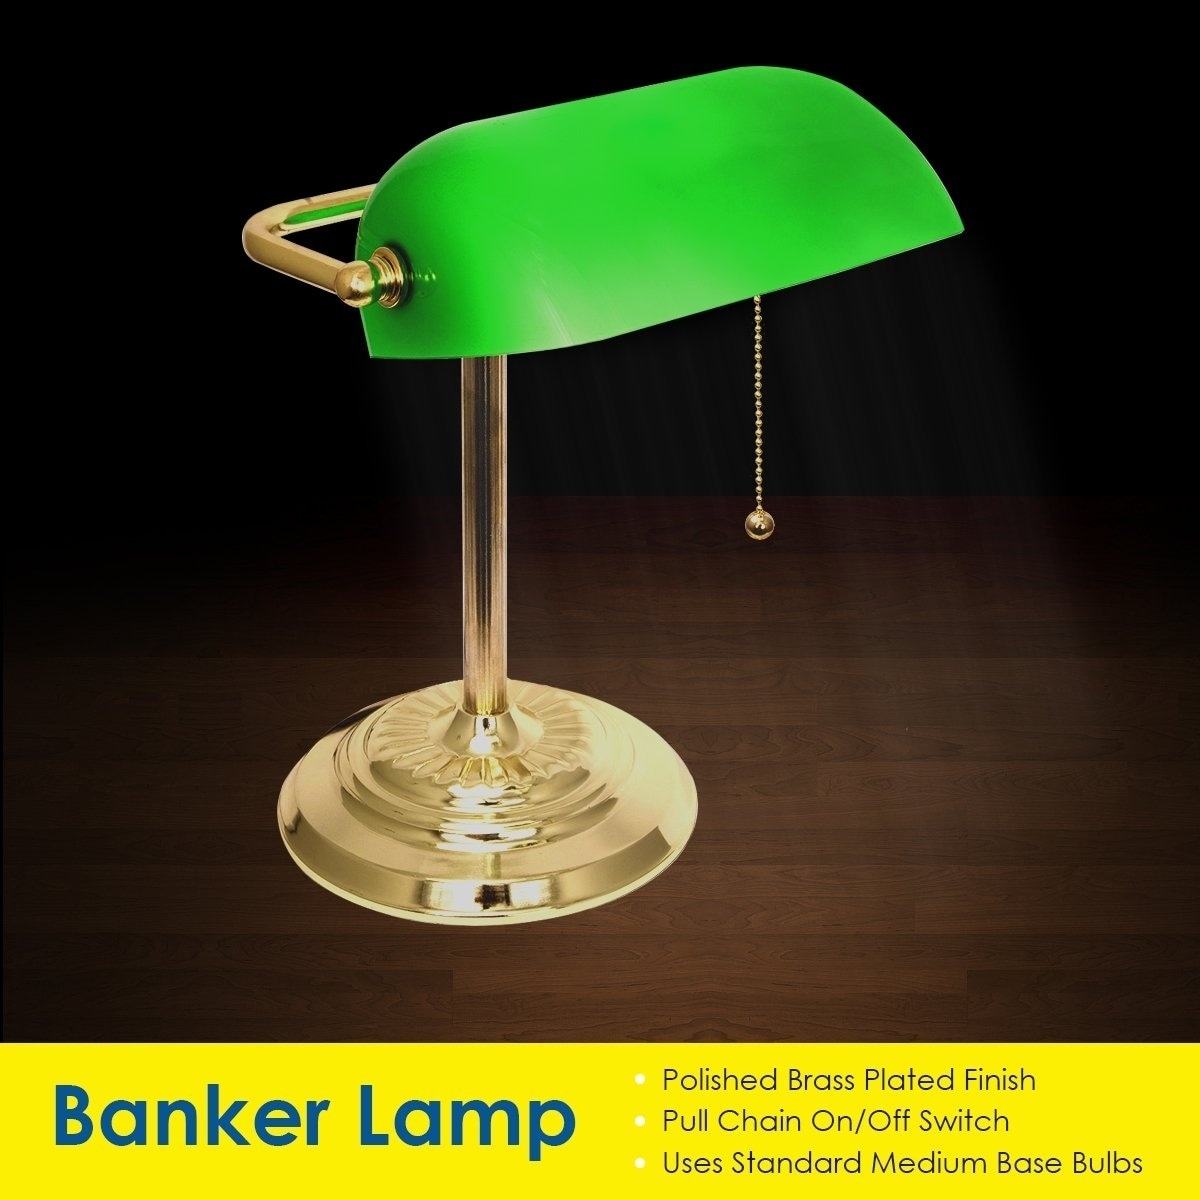 Bankers Lamp with Green Glass Shade and Brass Finish - On Sale - Bed Bath &  Beyond - 19495020